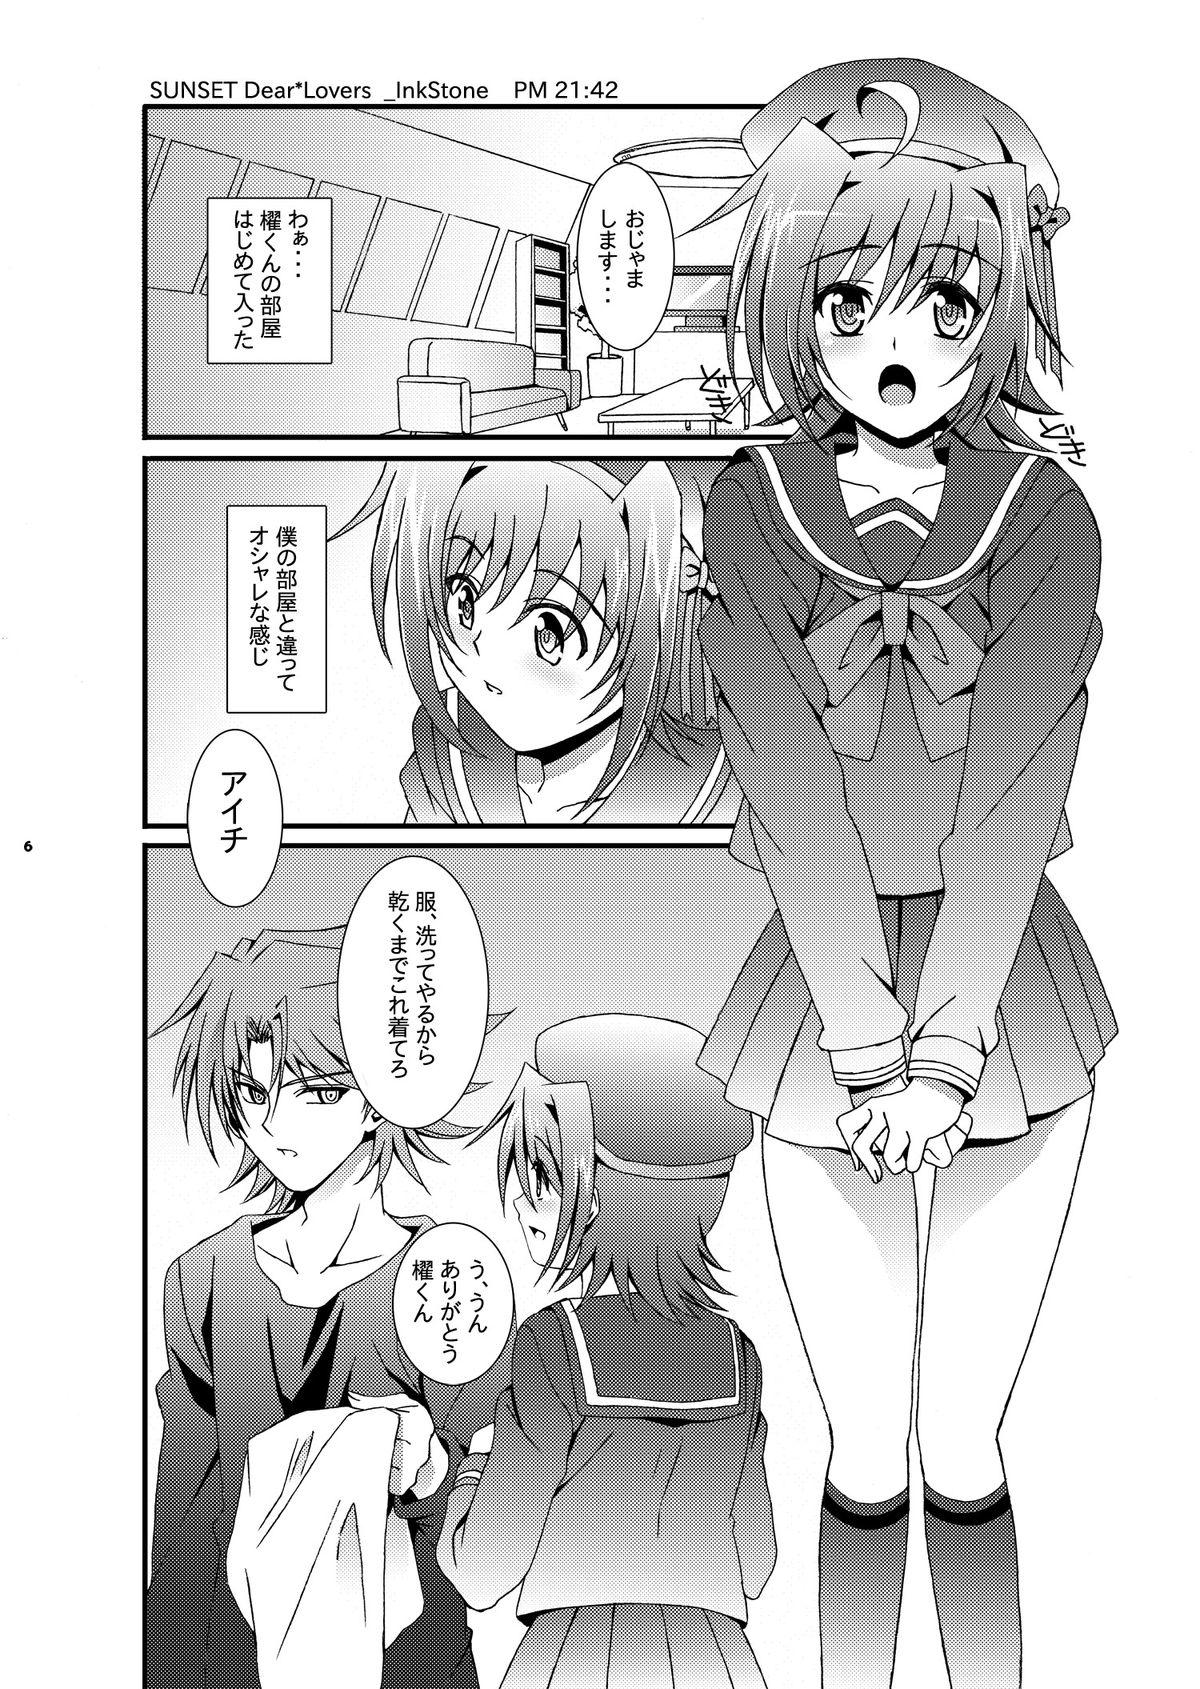 Babes SUNSET Dear Lovers - Cardfight vanguard Free Oral Sex - Page 7